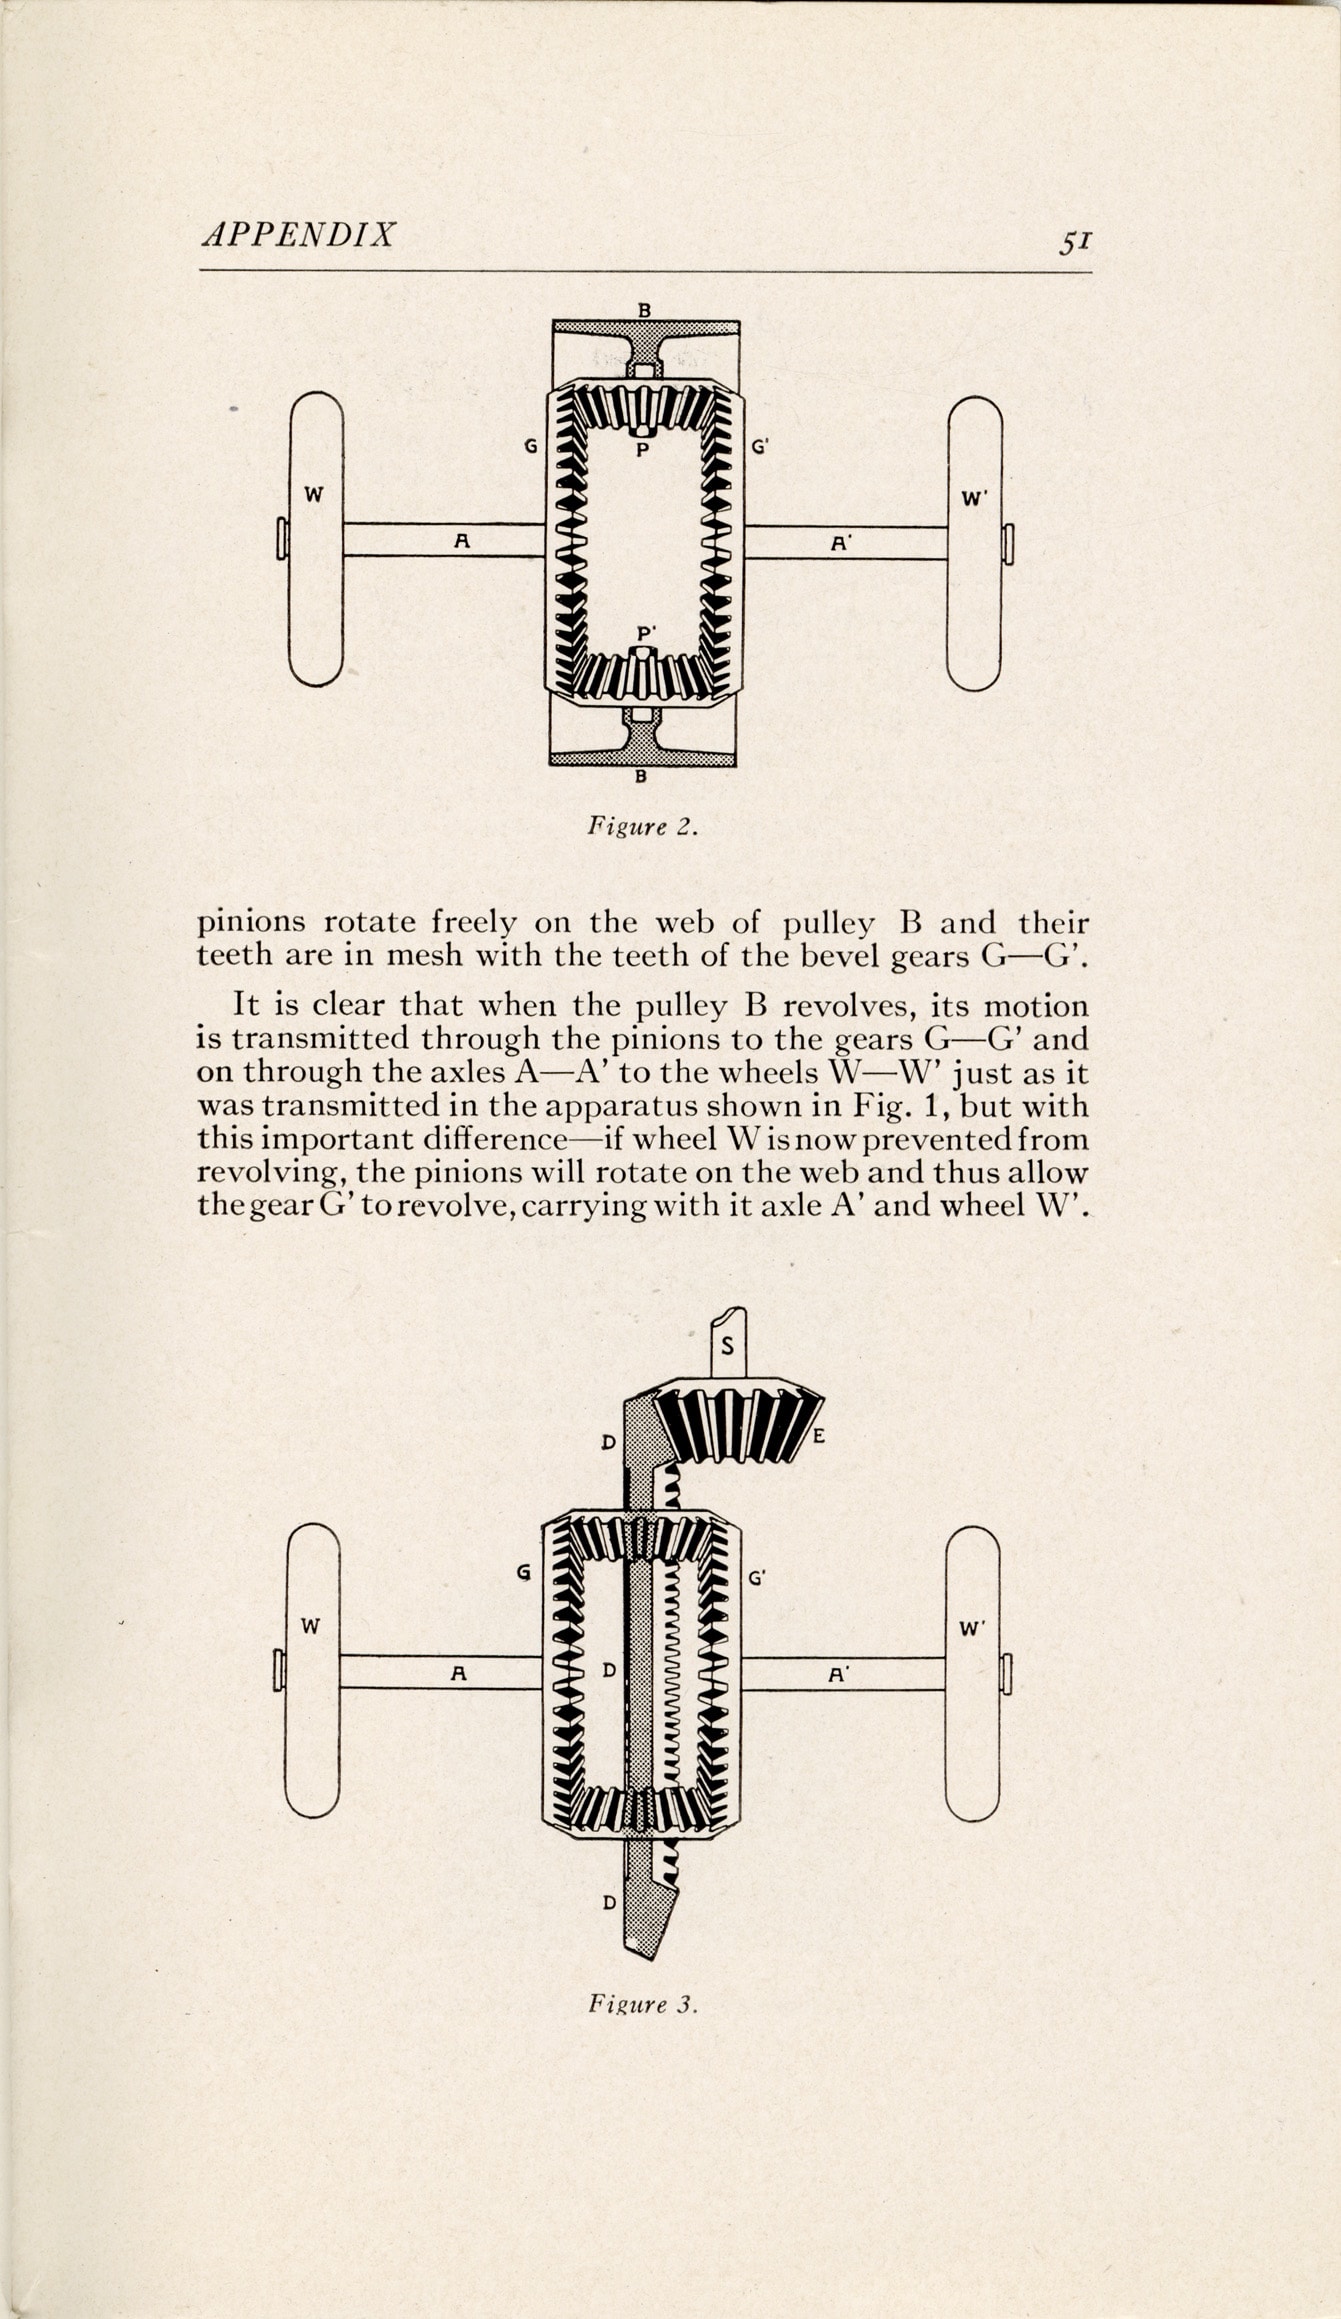 1912 TIMKEN PRIMER On the Anatomy of Automobile Axles 3rd edition Burton Historical Collection Detroit Public Library page 51